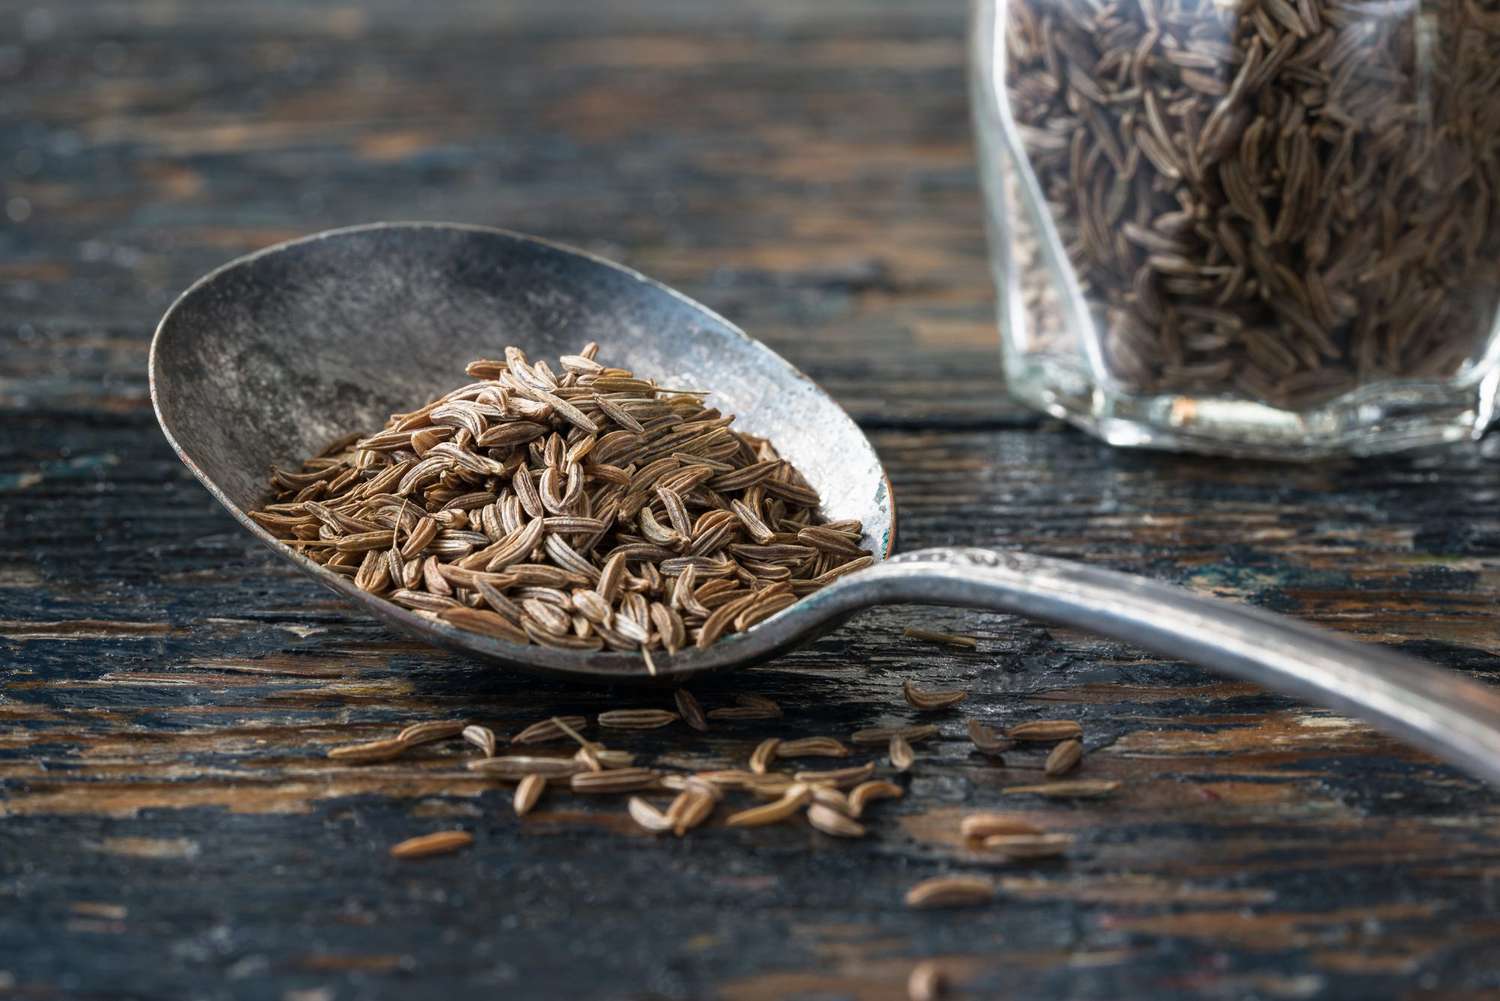 What Do You Use Caraway Seeds For